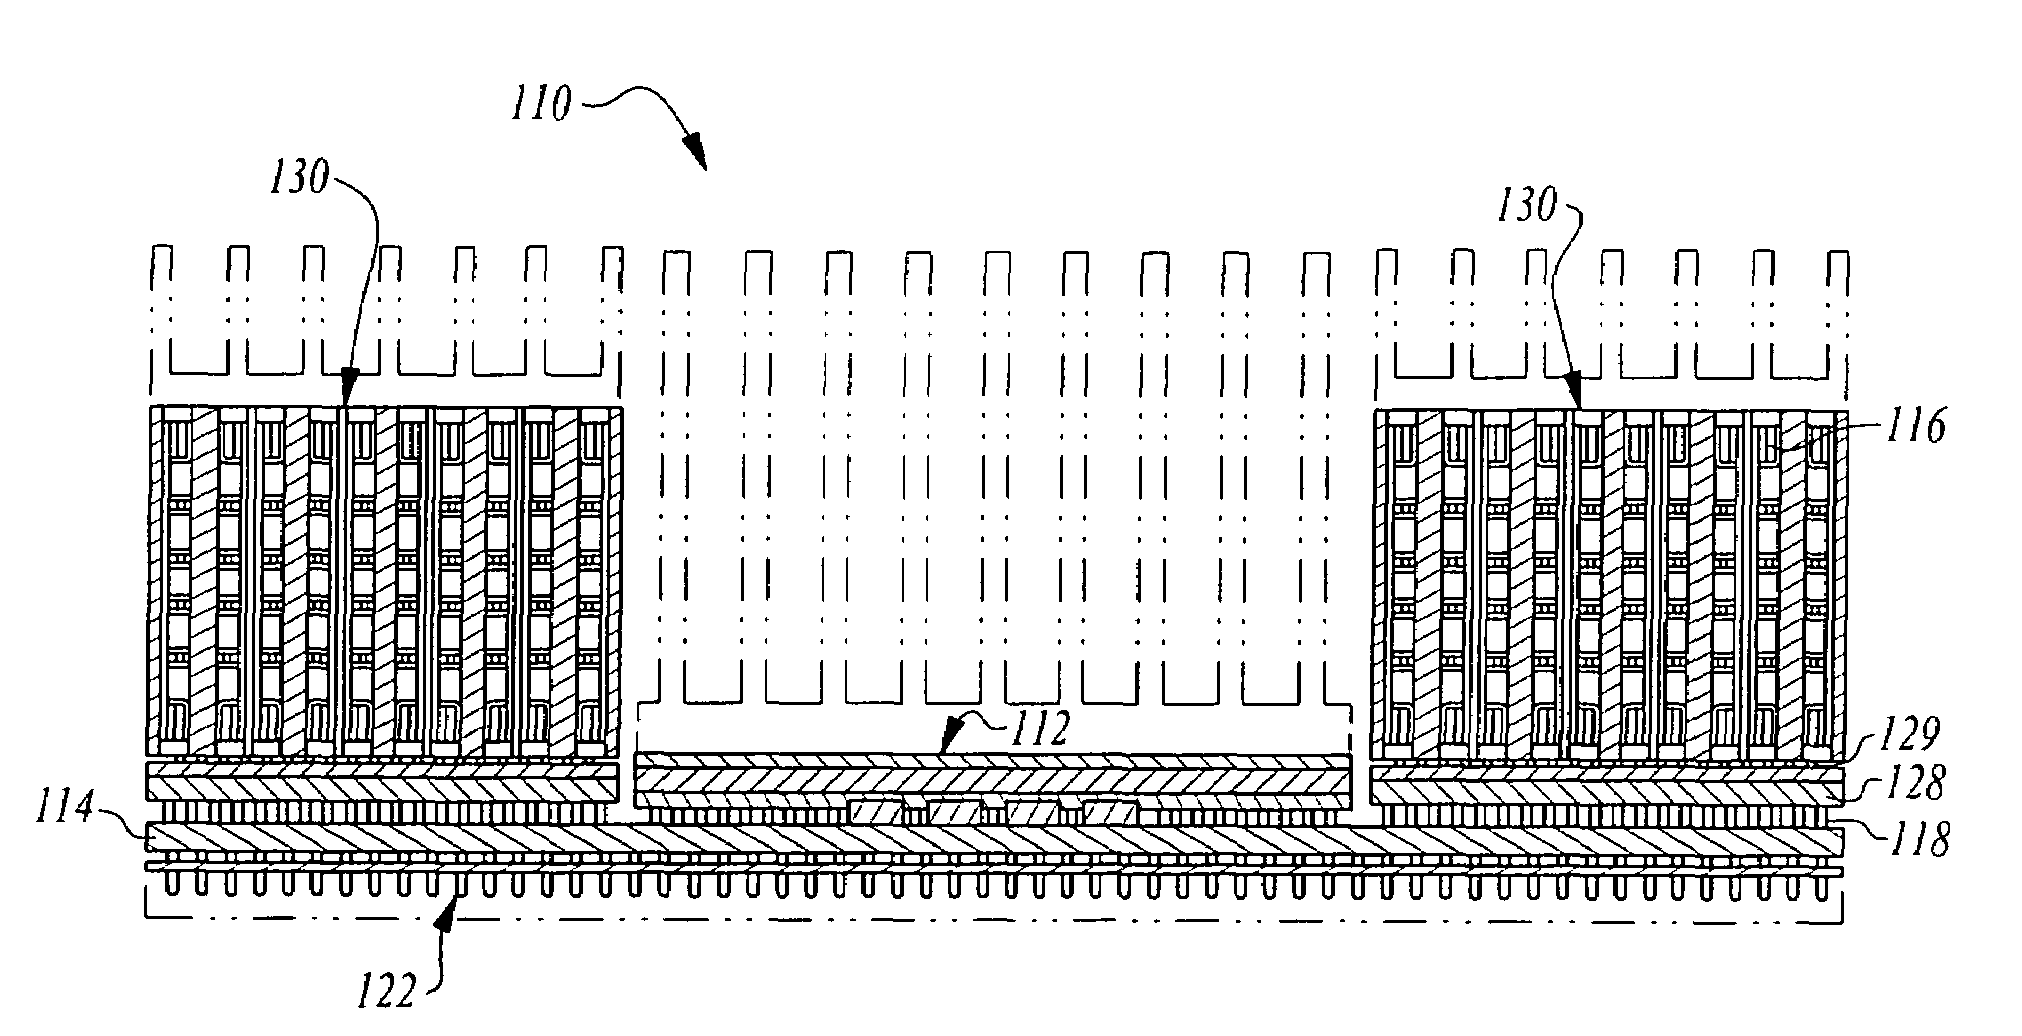 Field programmable gate array utilizing dedicated memory stacks in a vertical layer format